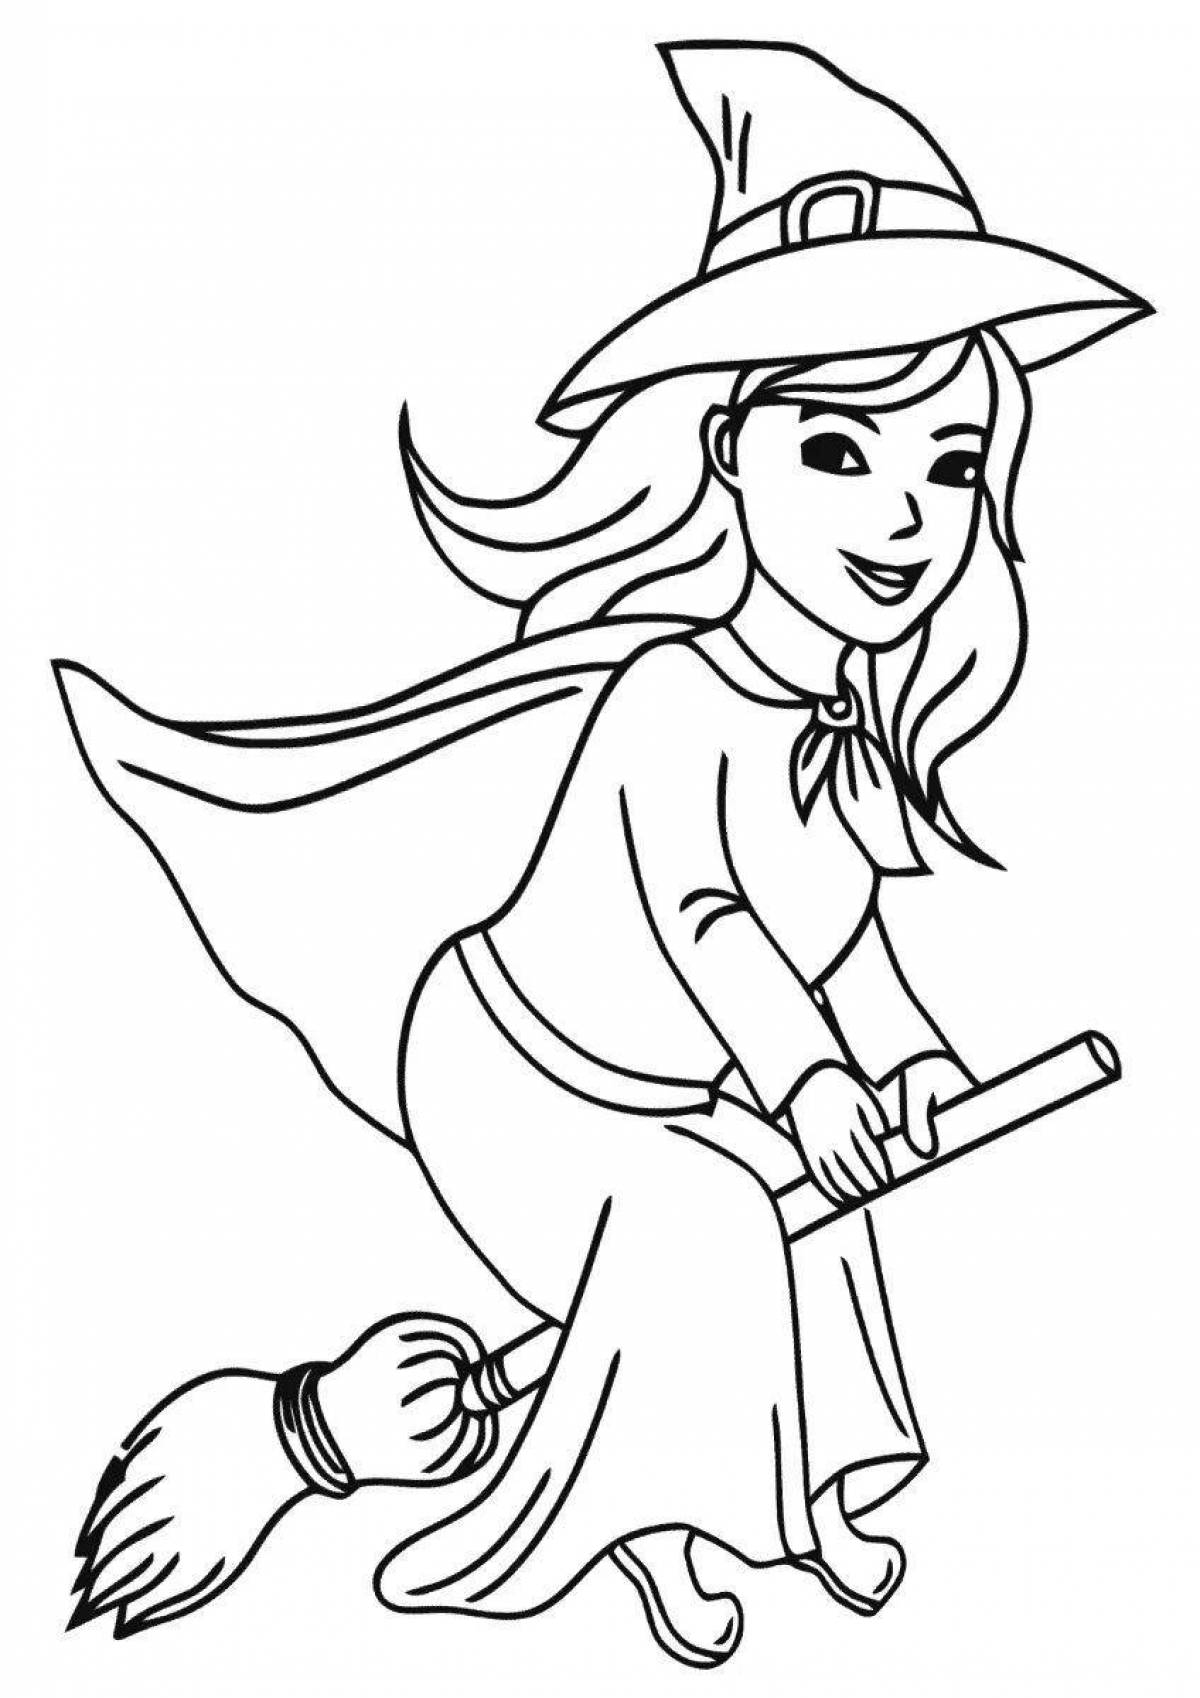 Adorable witch coloring book for kids